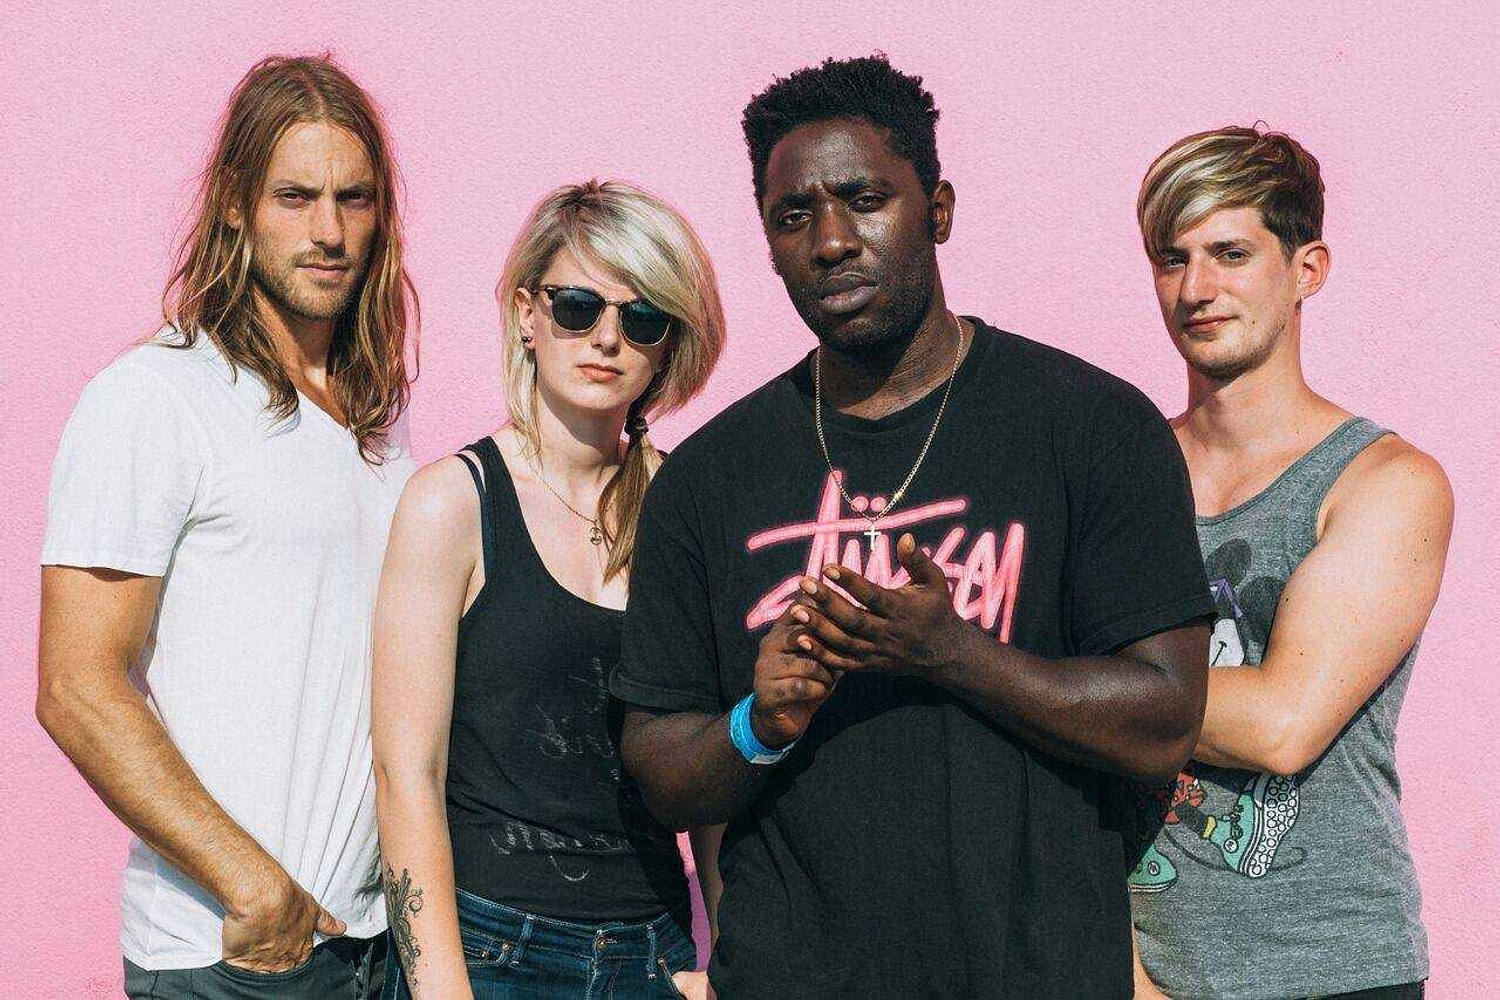 Bloc Party, TOY and Oscar to play [PIAS] Nites 2016